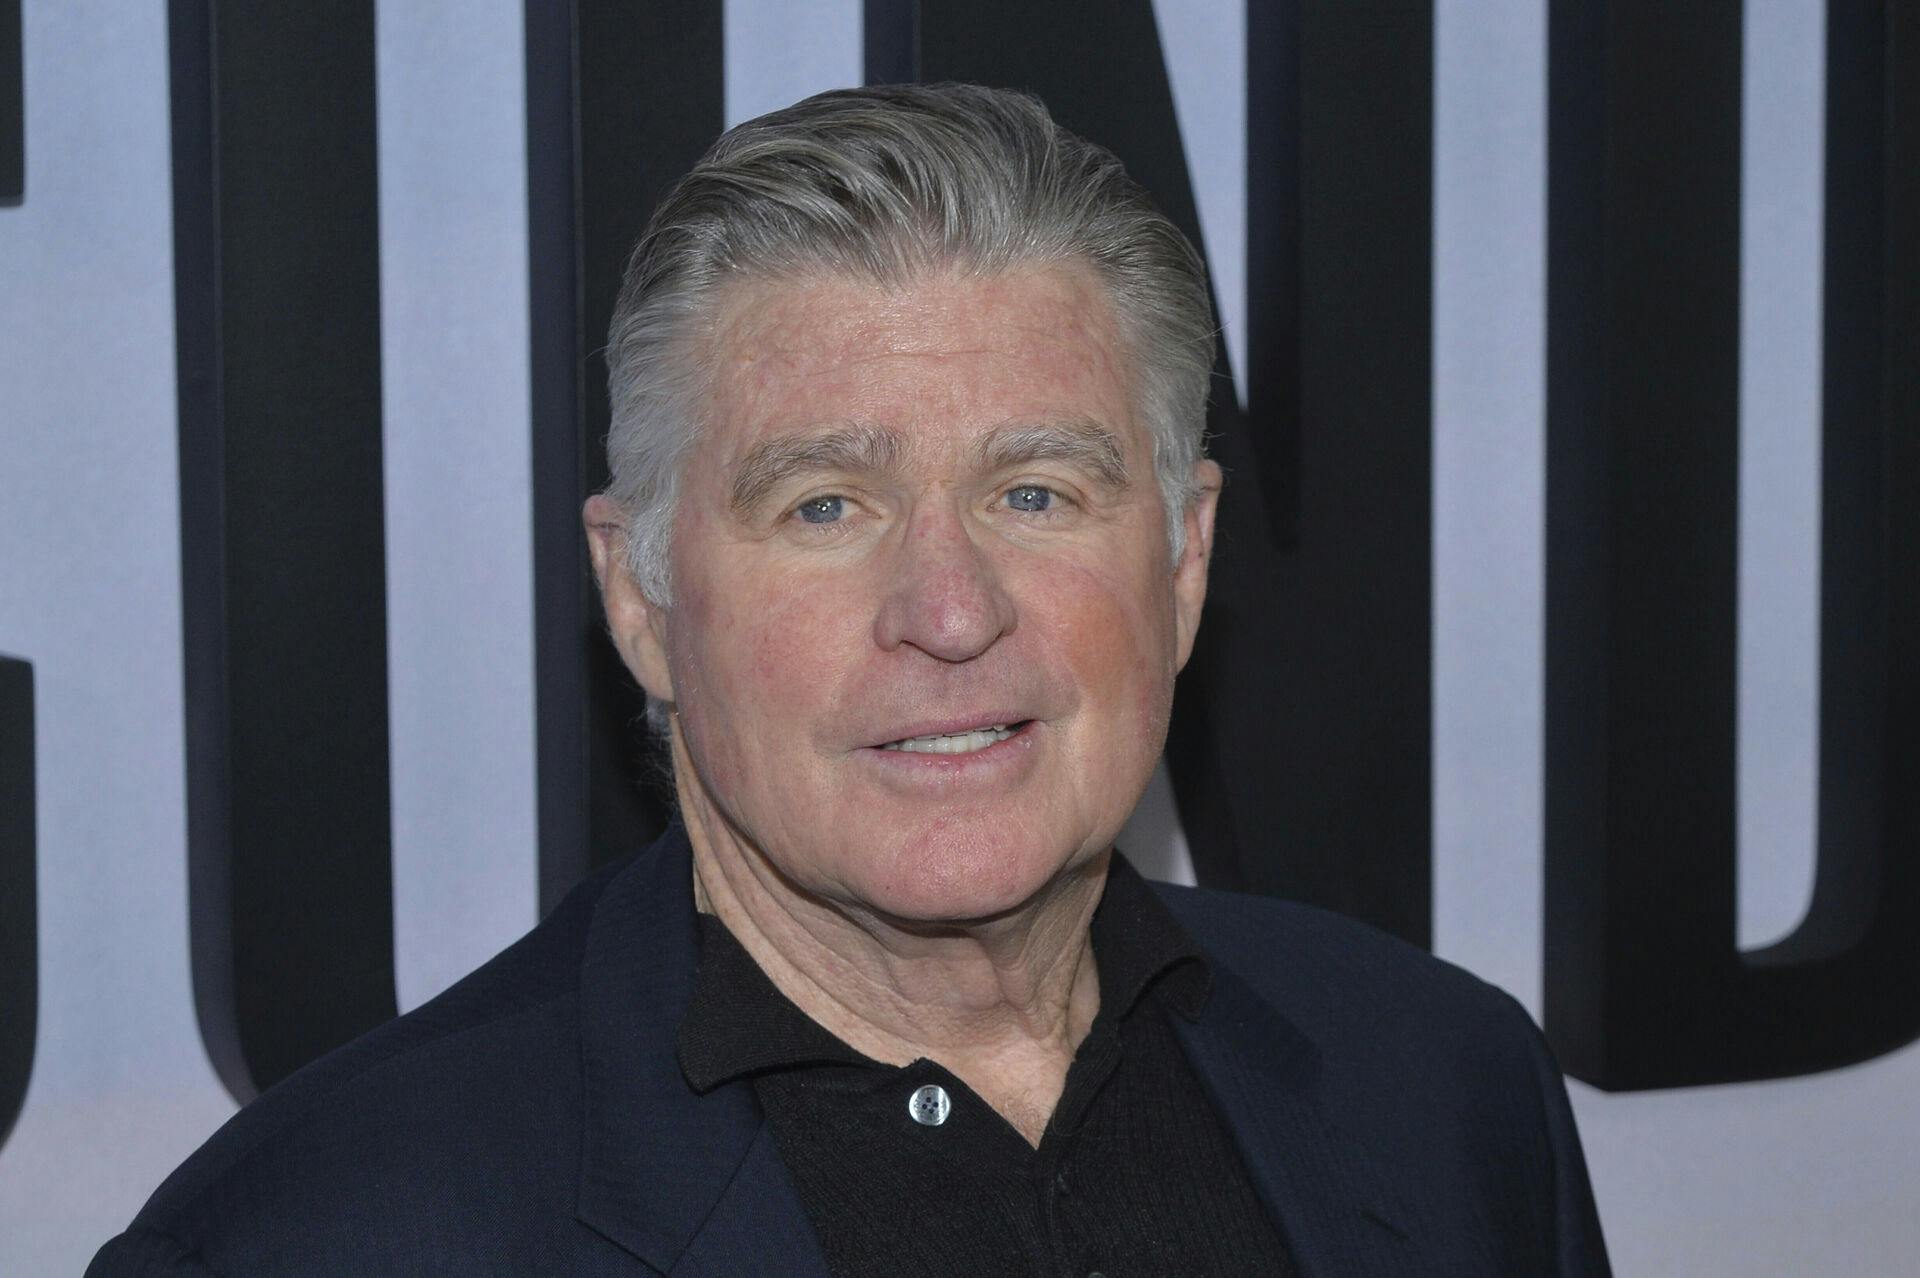 Photo by: NDZ/STAR MAX/IPx 2023 12/12/18 Treat Williams attends "Second Act" World Premiere at Regal Union Square Theatre, Stadium 14 on December 12, 2018 in New York City.